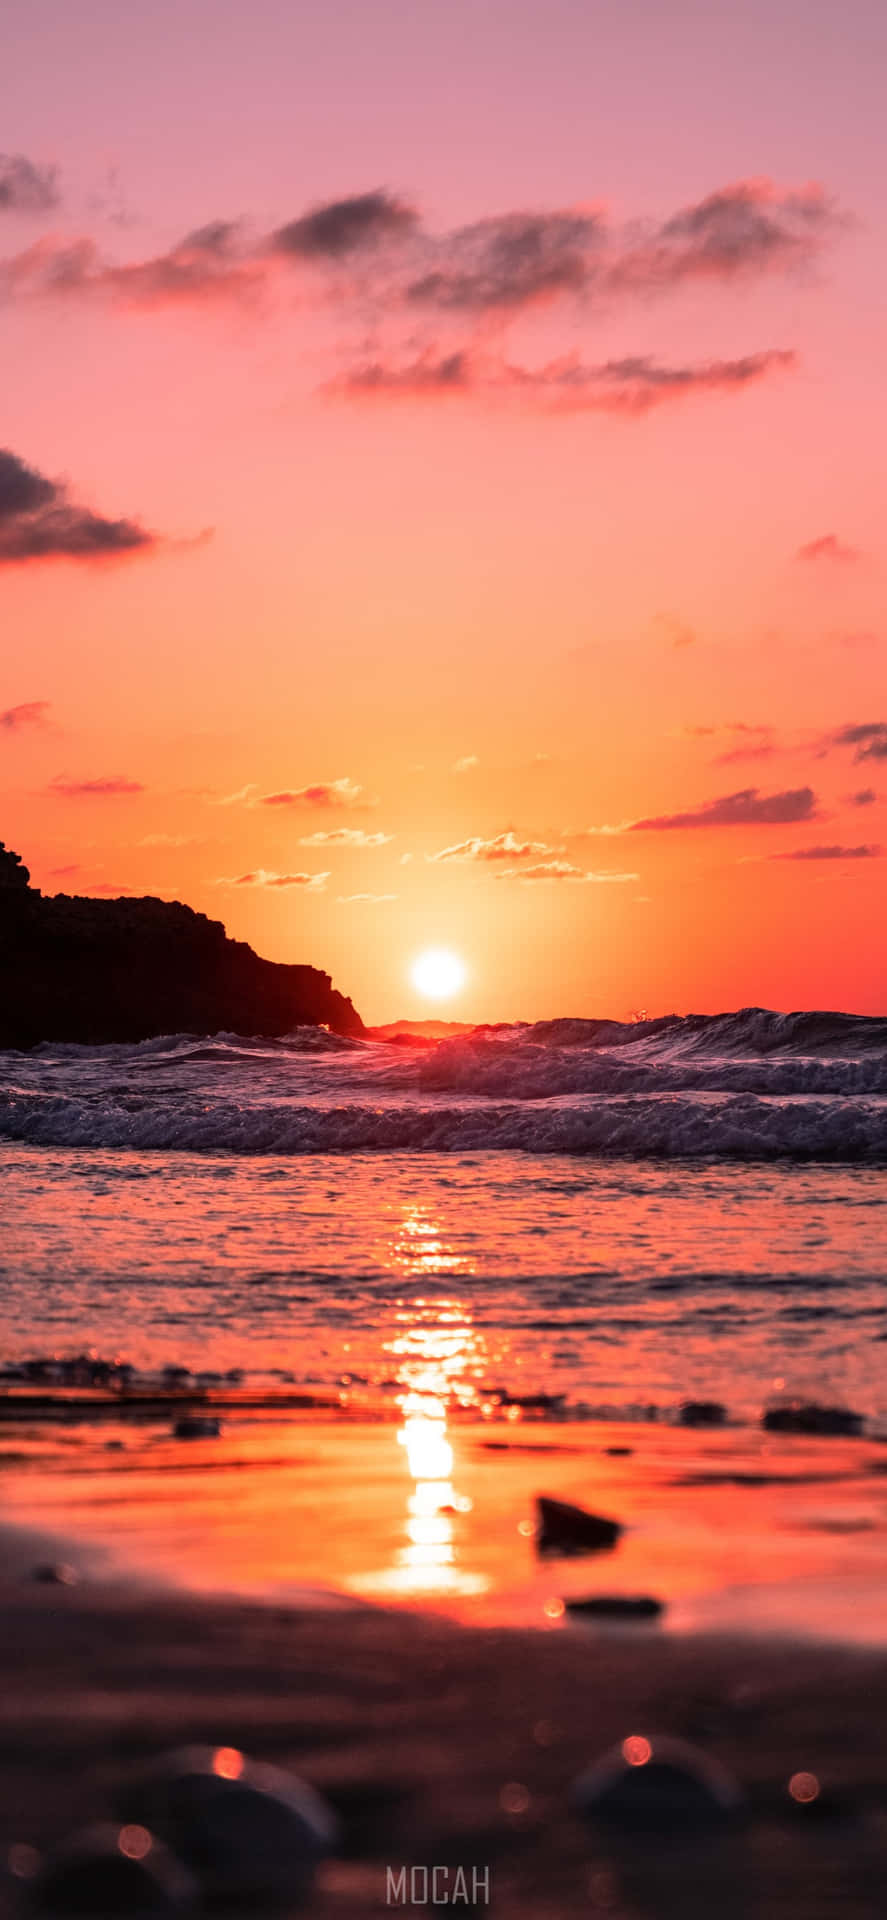 A sun-kissed sunrise on a beach, perfect for a scenic iPhone wallpaper Wallpaper